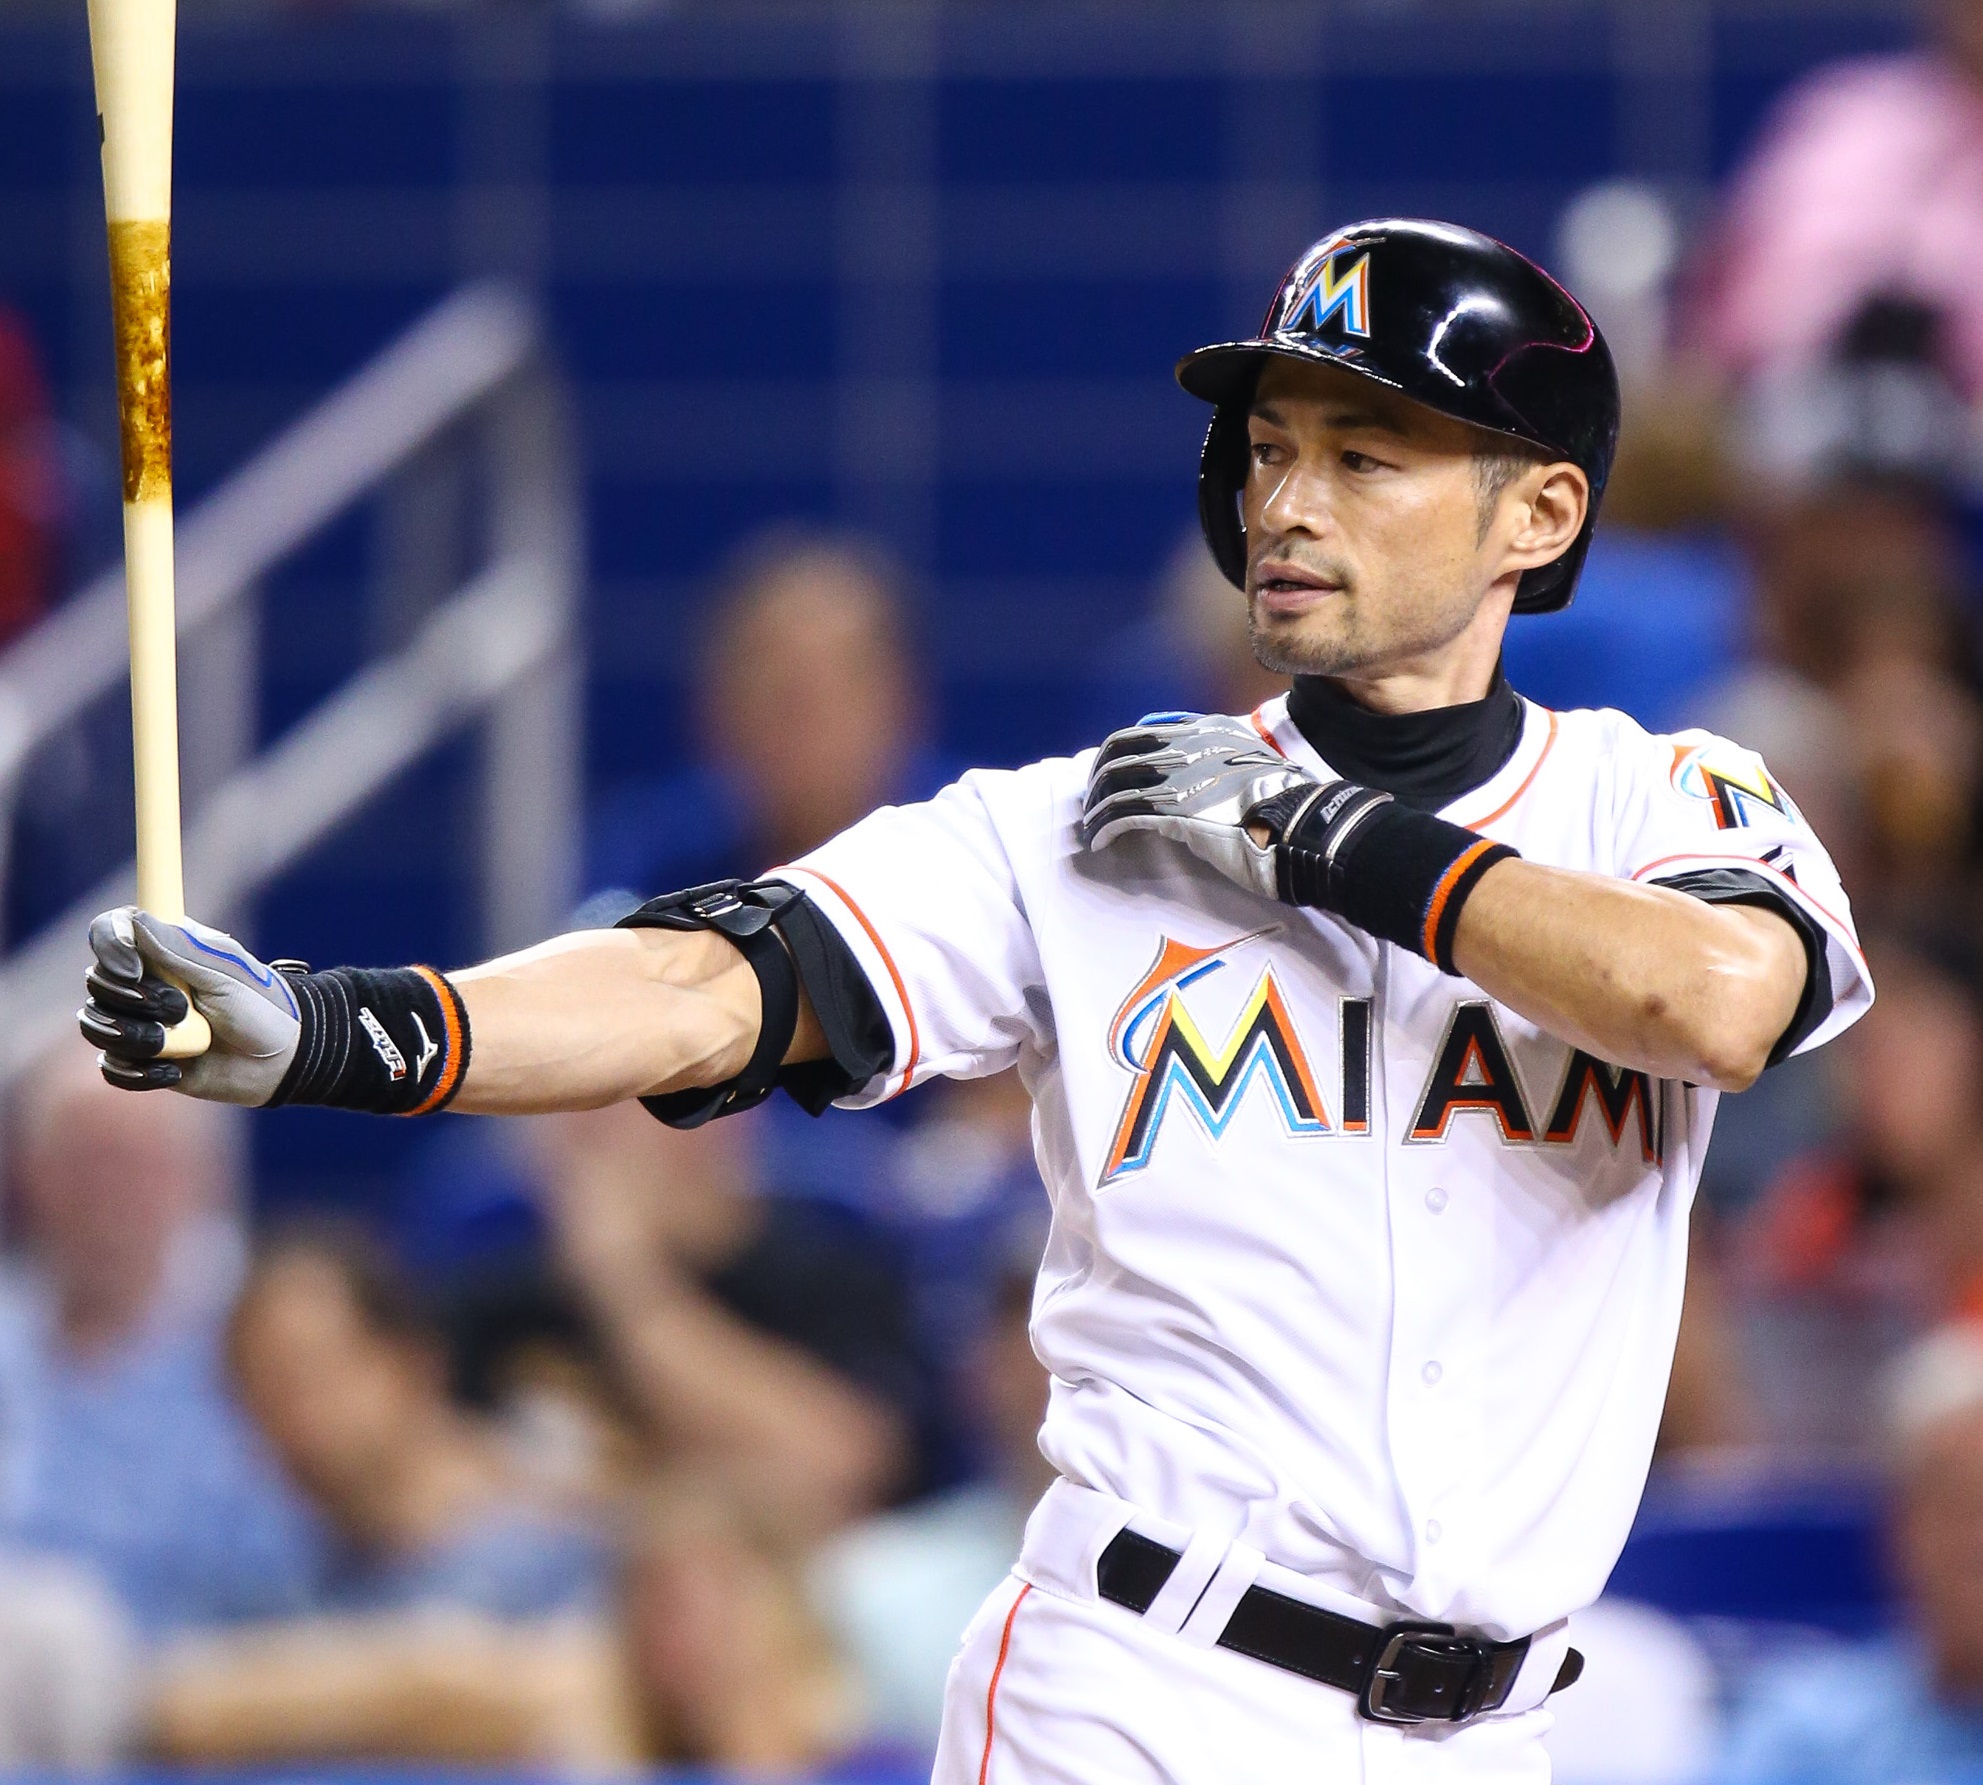 MIAMI, FL - SEPTEMBER 11: Ichiro Suzuki #51 of the Miami Marlins in action during the game against the Washington Nationals at Marlins Park on September 11, 2015 in Miami, Florida. (Photo by Rob Foldy/Getty Images)